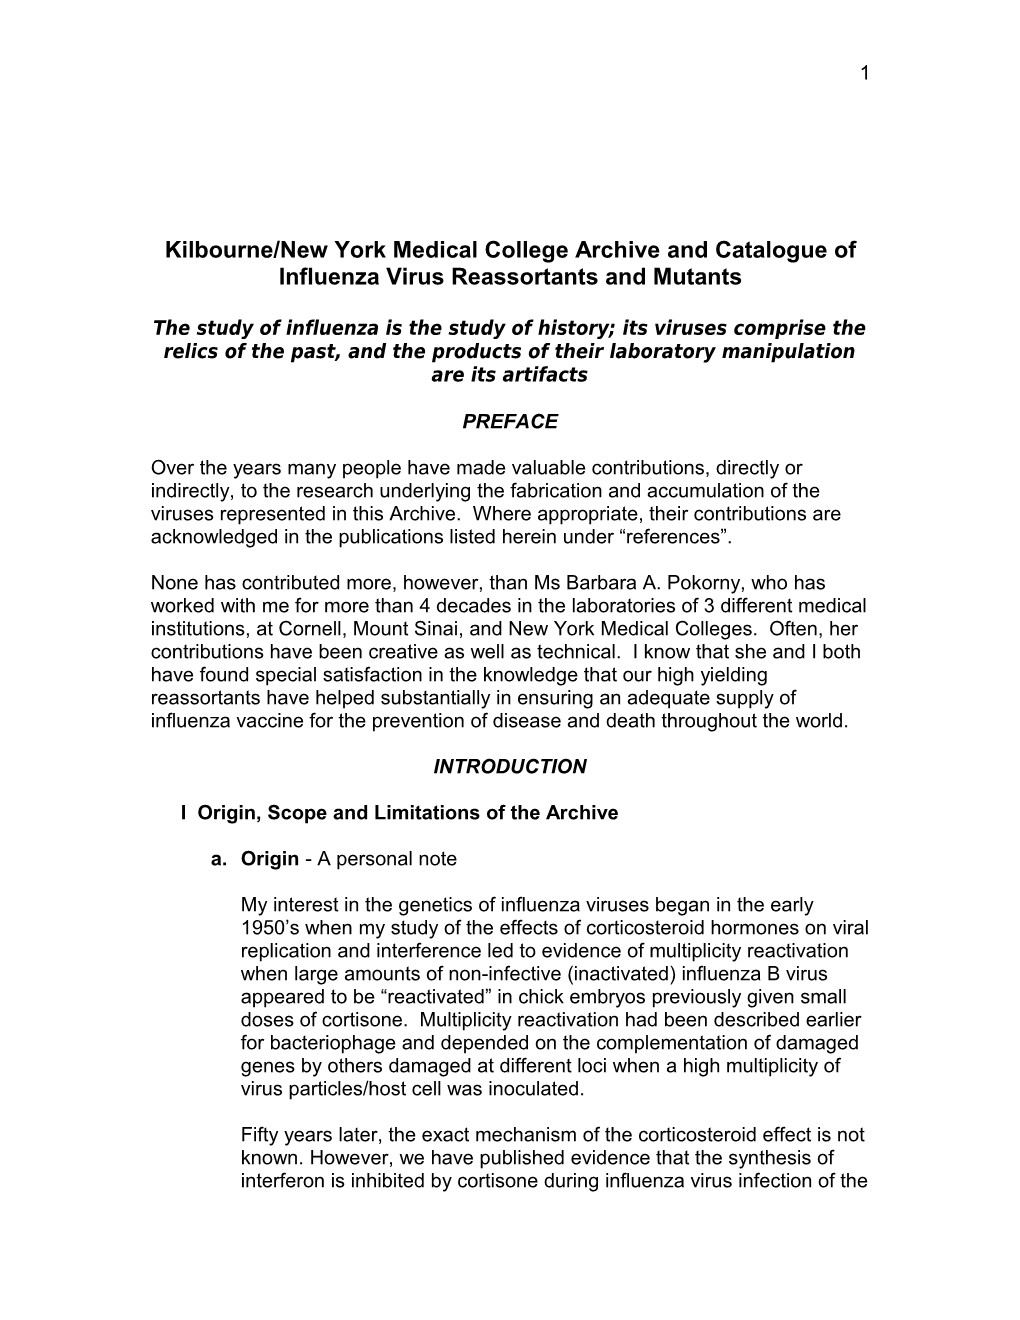 Kilbourne/New York Medical College Archive and Catalogue of Influenza Virus Reassortants